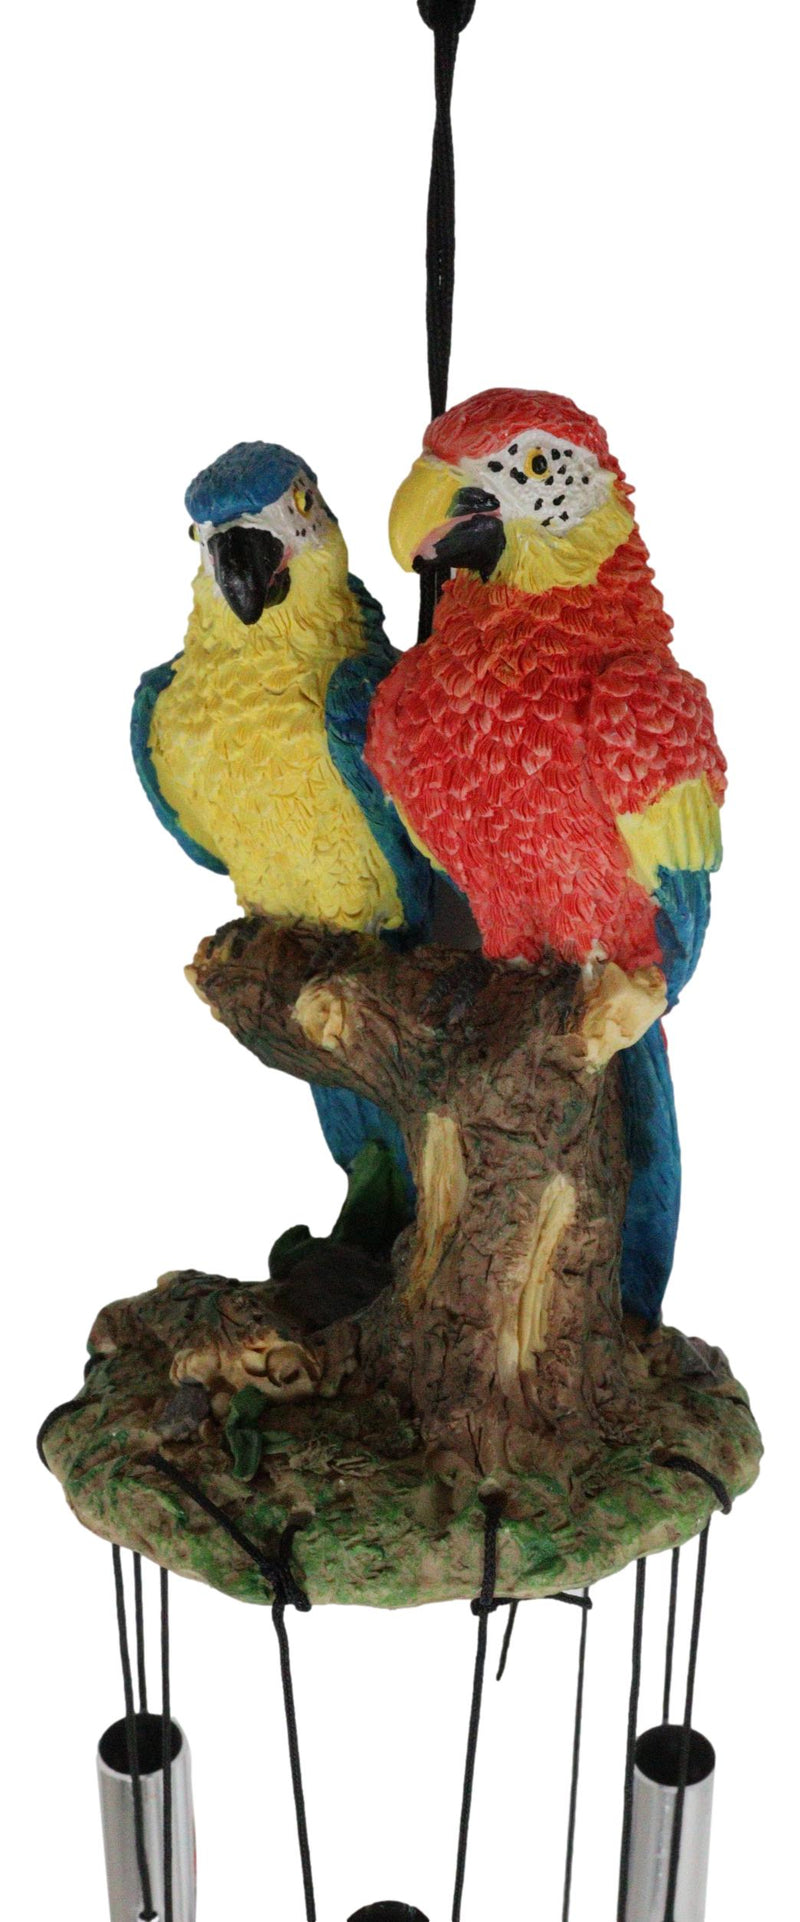 Red and Blue Scarlet Macaw Parrots Couple Resonant Relaxing Wind Chime Patio